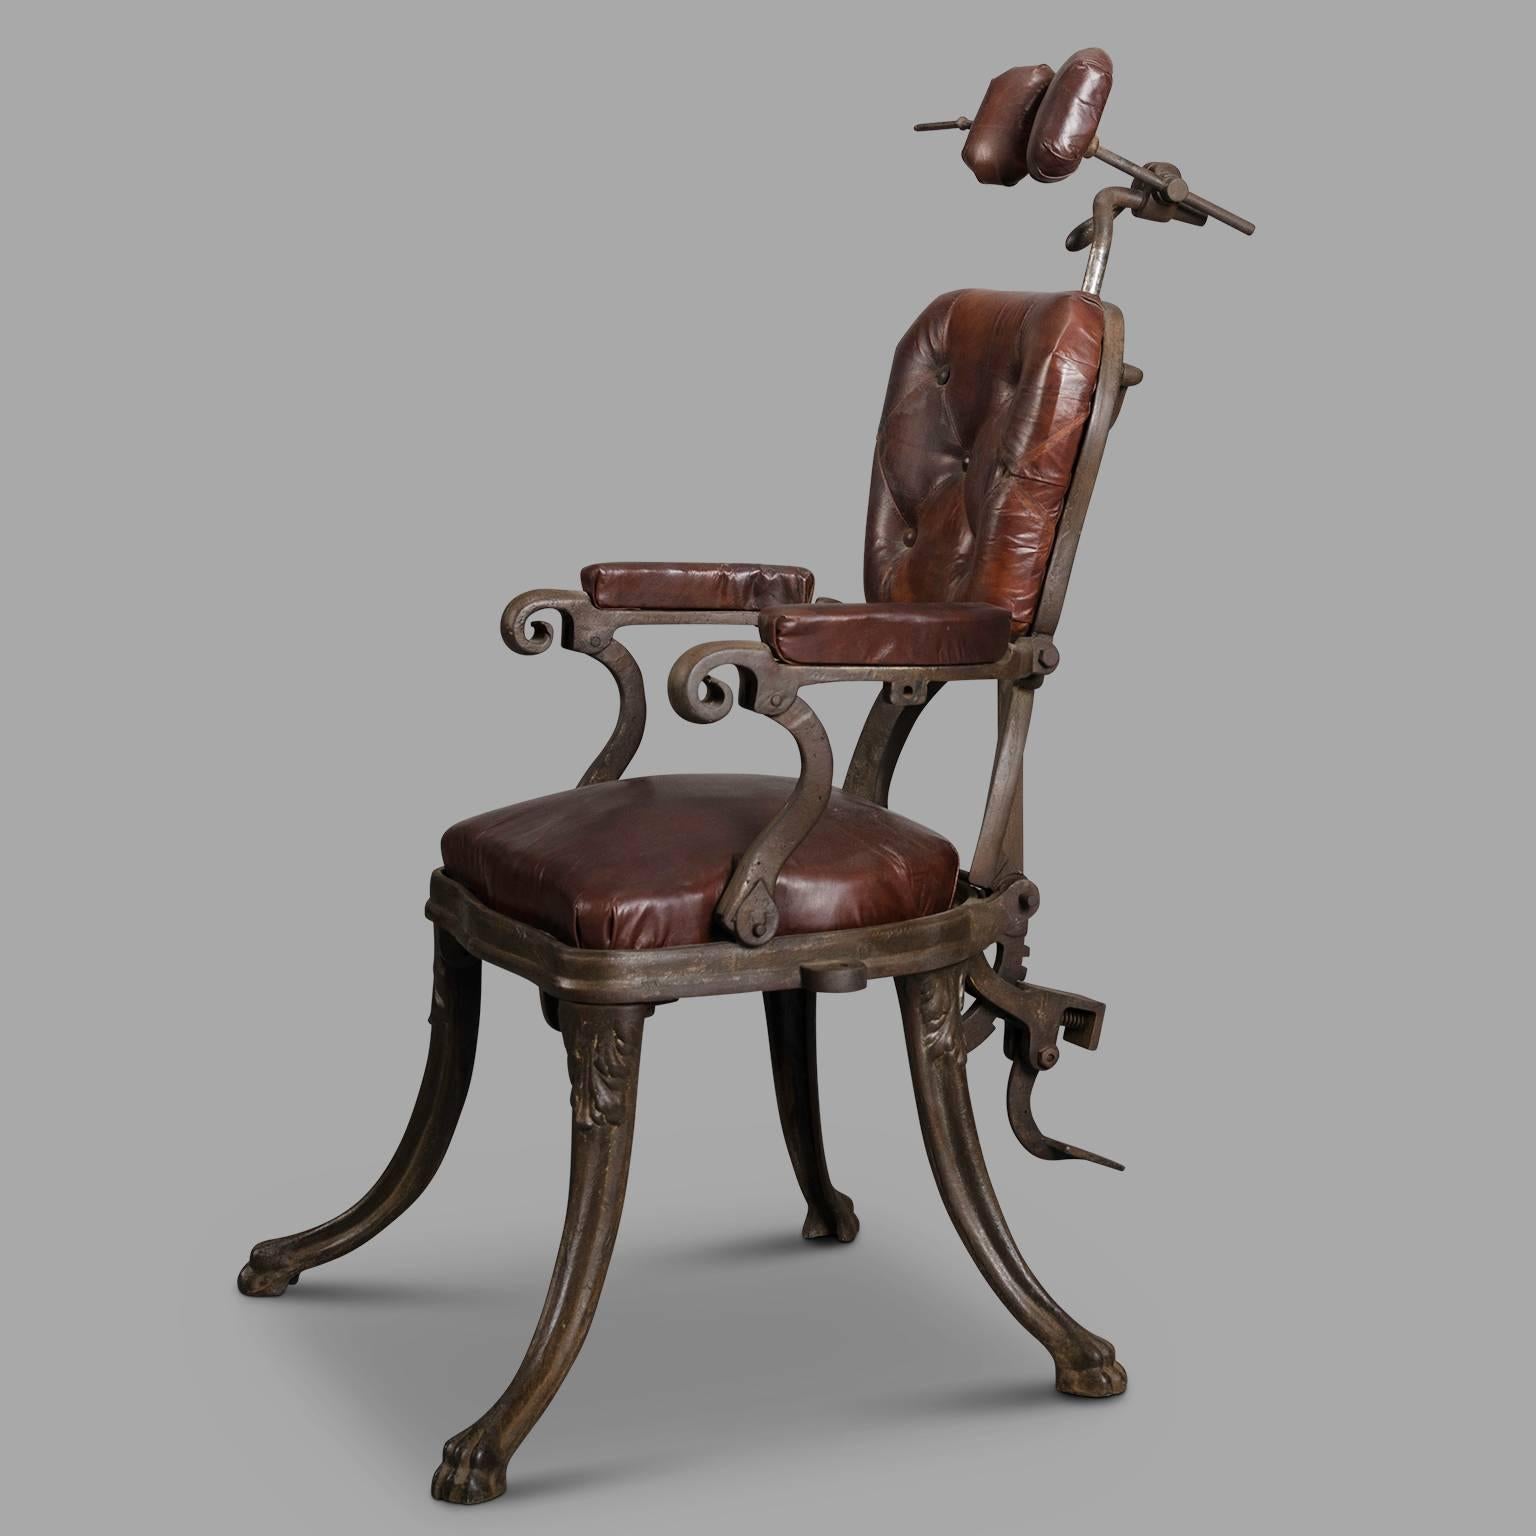 Early 20th century cast iron dentist chair. Backrest, seat, armrests and headrest in patinated leather. Pedal inclination mechanism on the back. The footstool is missing. Model inspired by that of Adam Schneider whose simplified mechanical met great